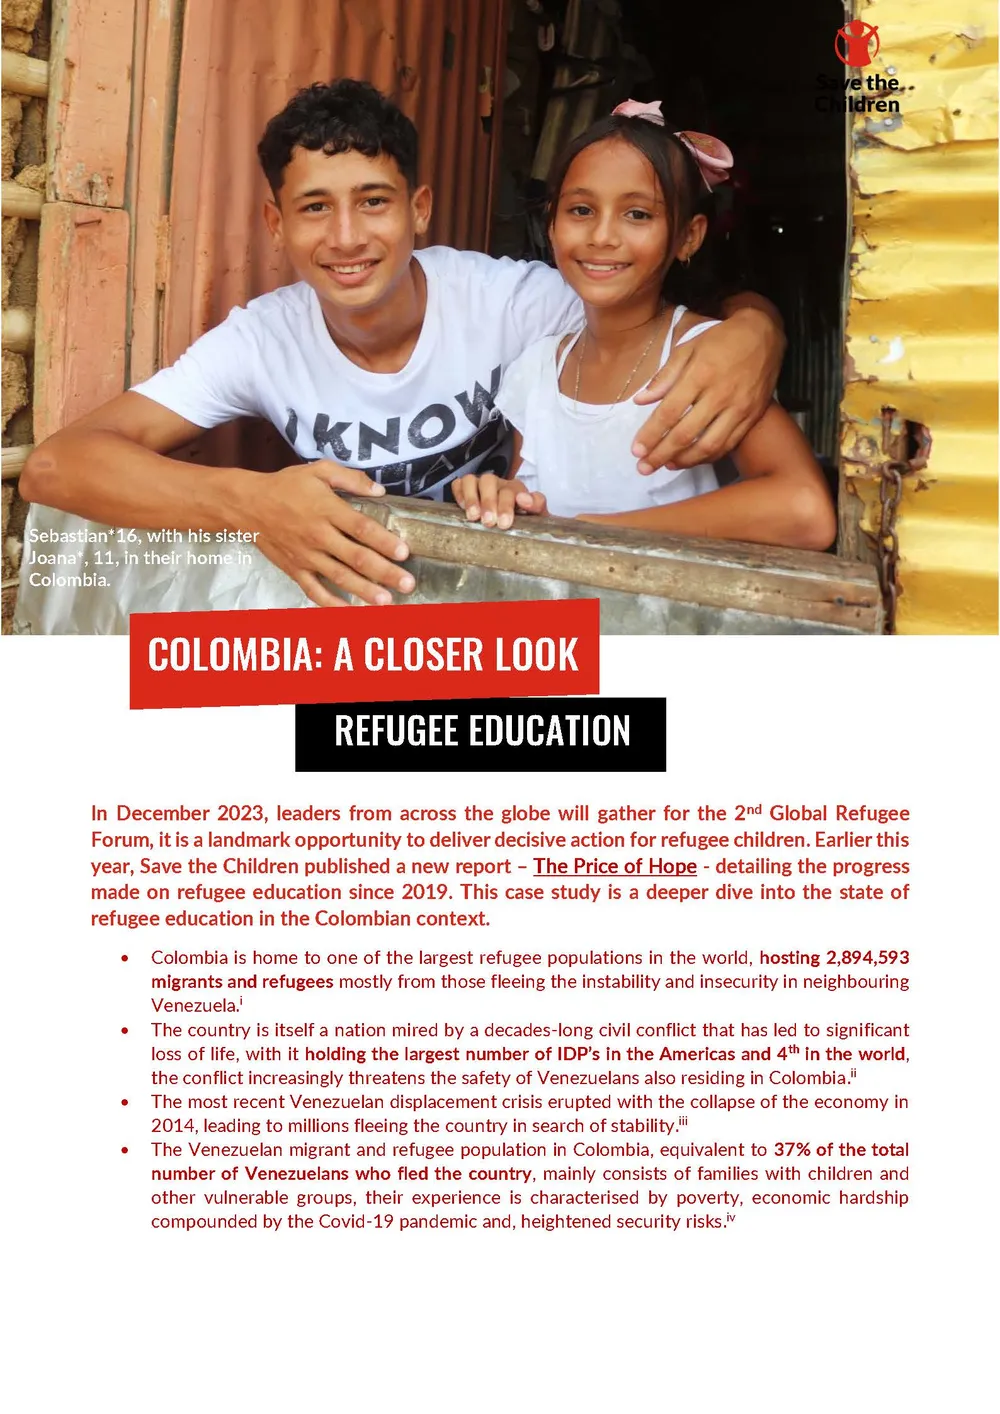 Colombia: A Closer look, refugee education